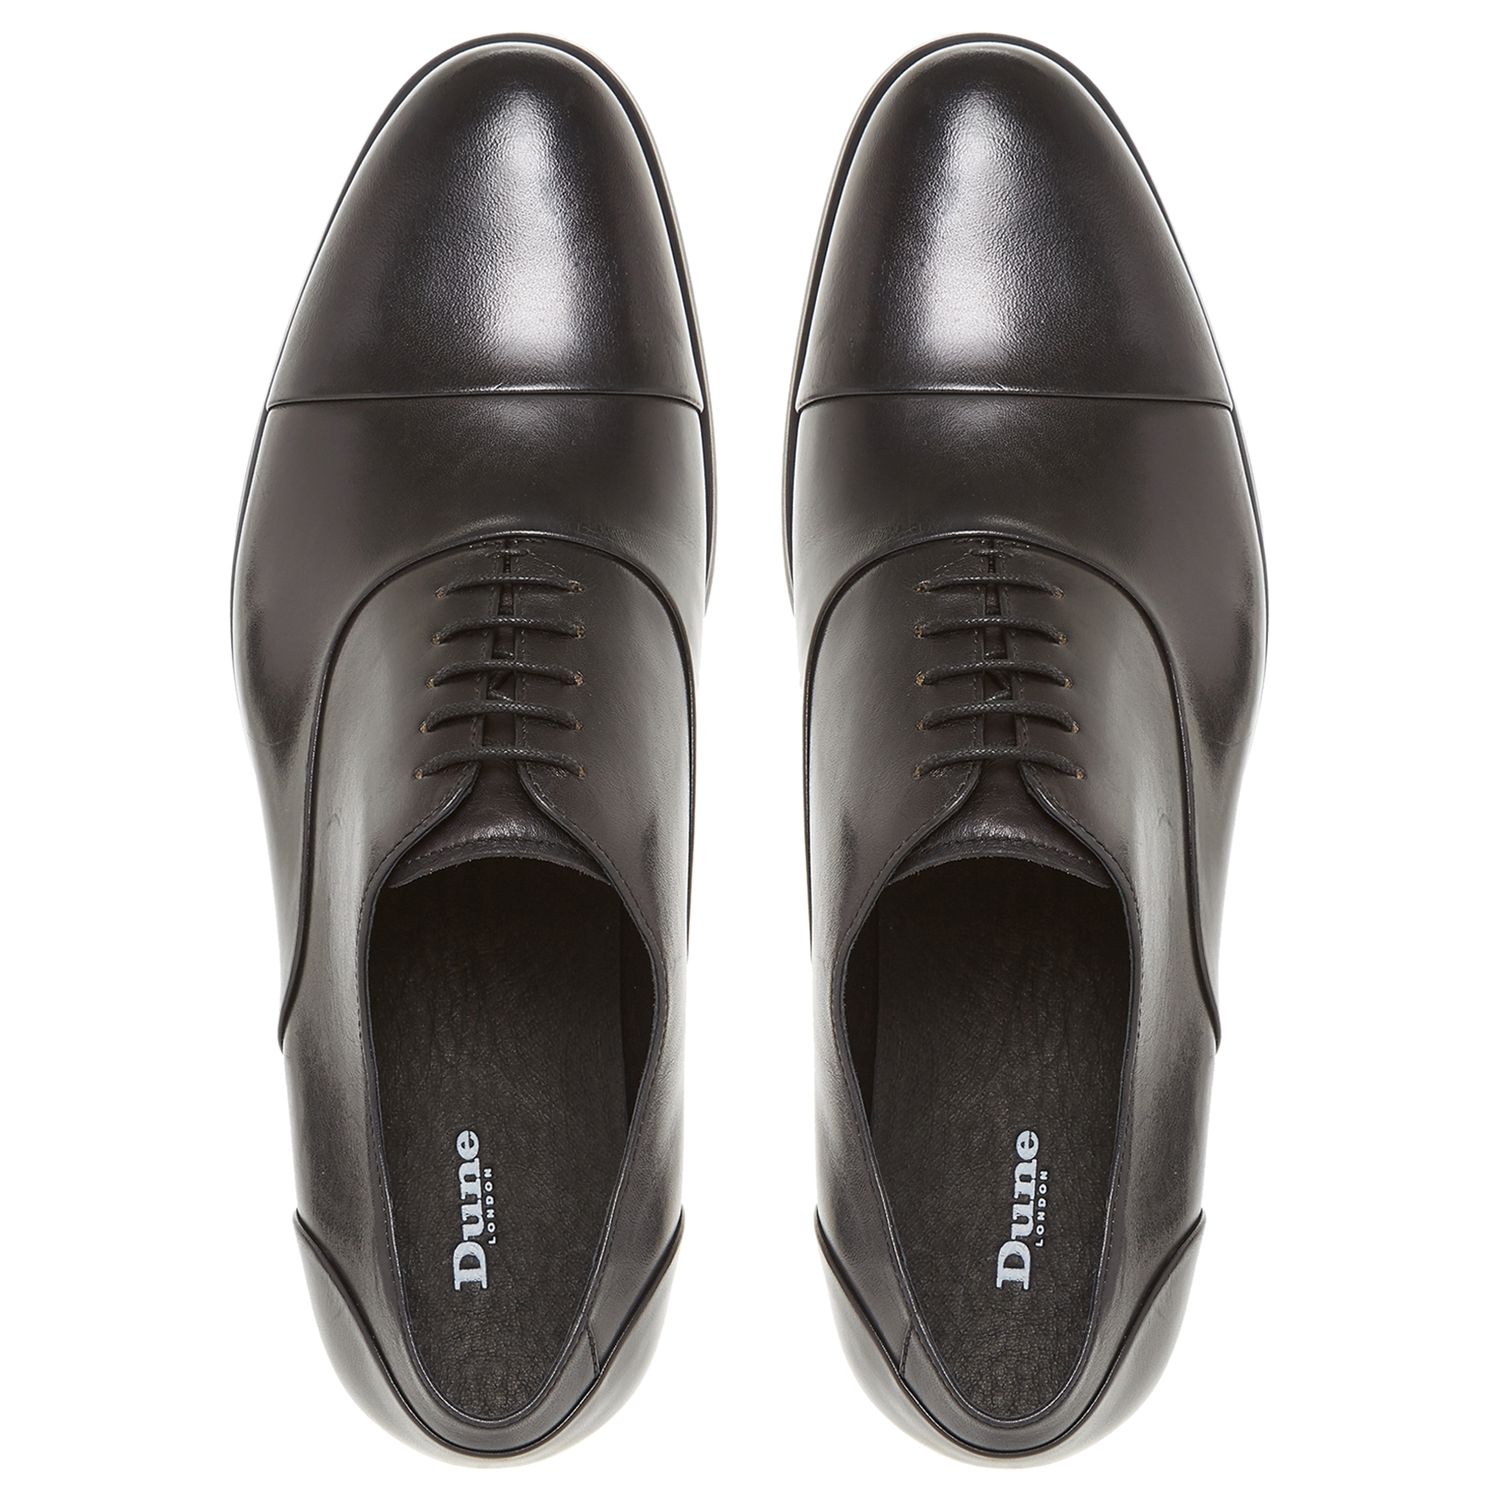 Dune Robb Leather Derby Shoes